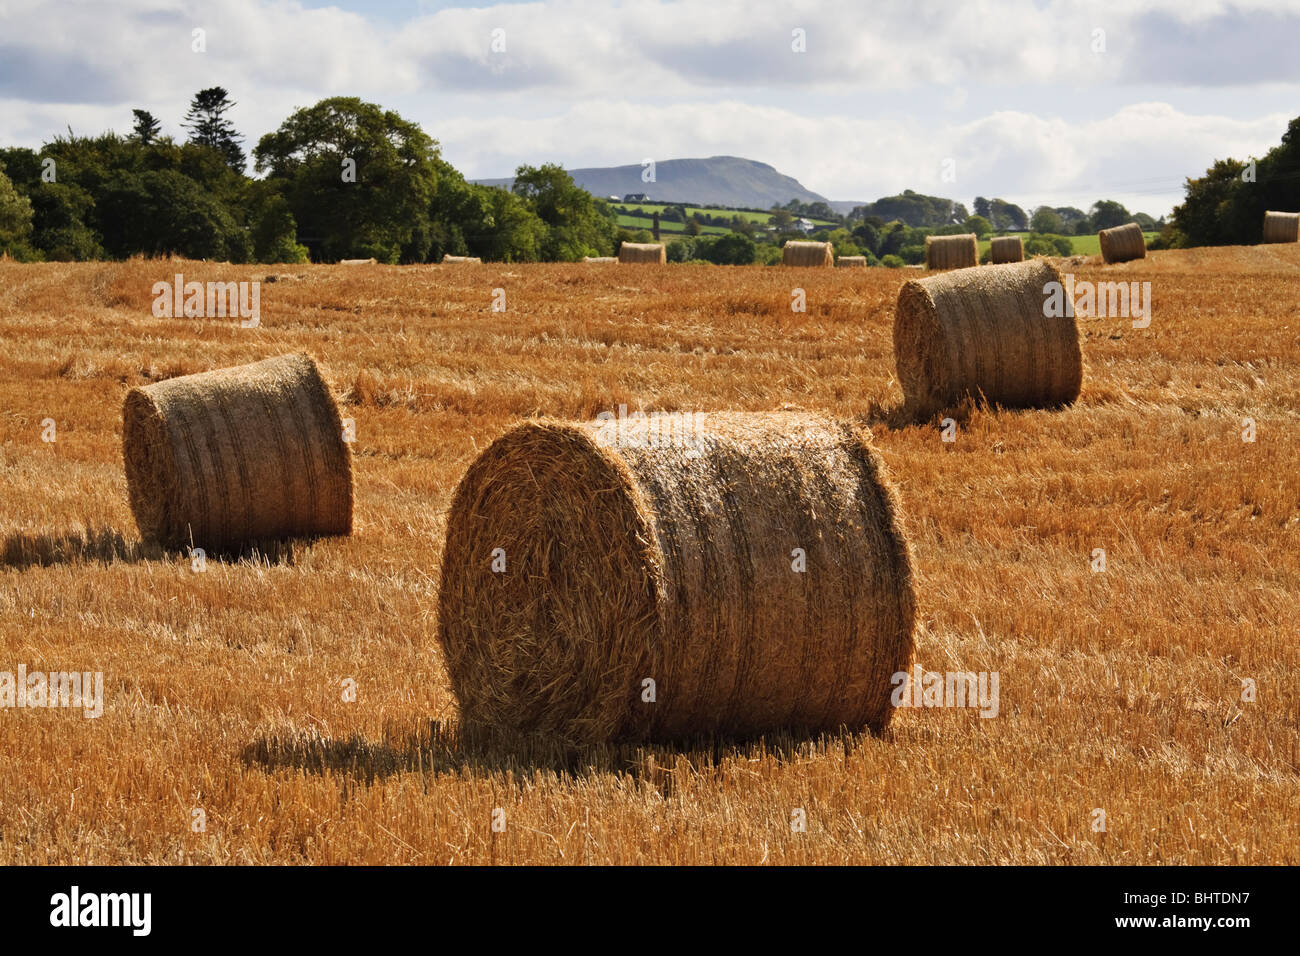 Bales of hay in a farm field near the Roe Valley Country Park, Limavady, County Londonderry, Northern Ireland Stock Photo